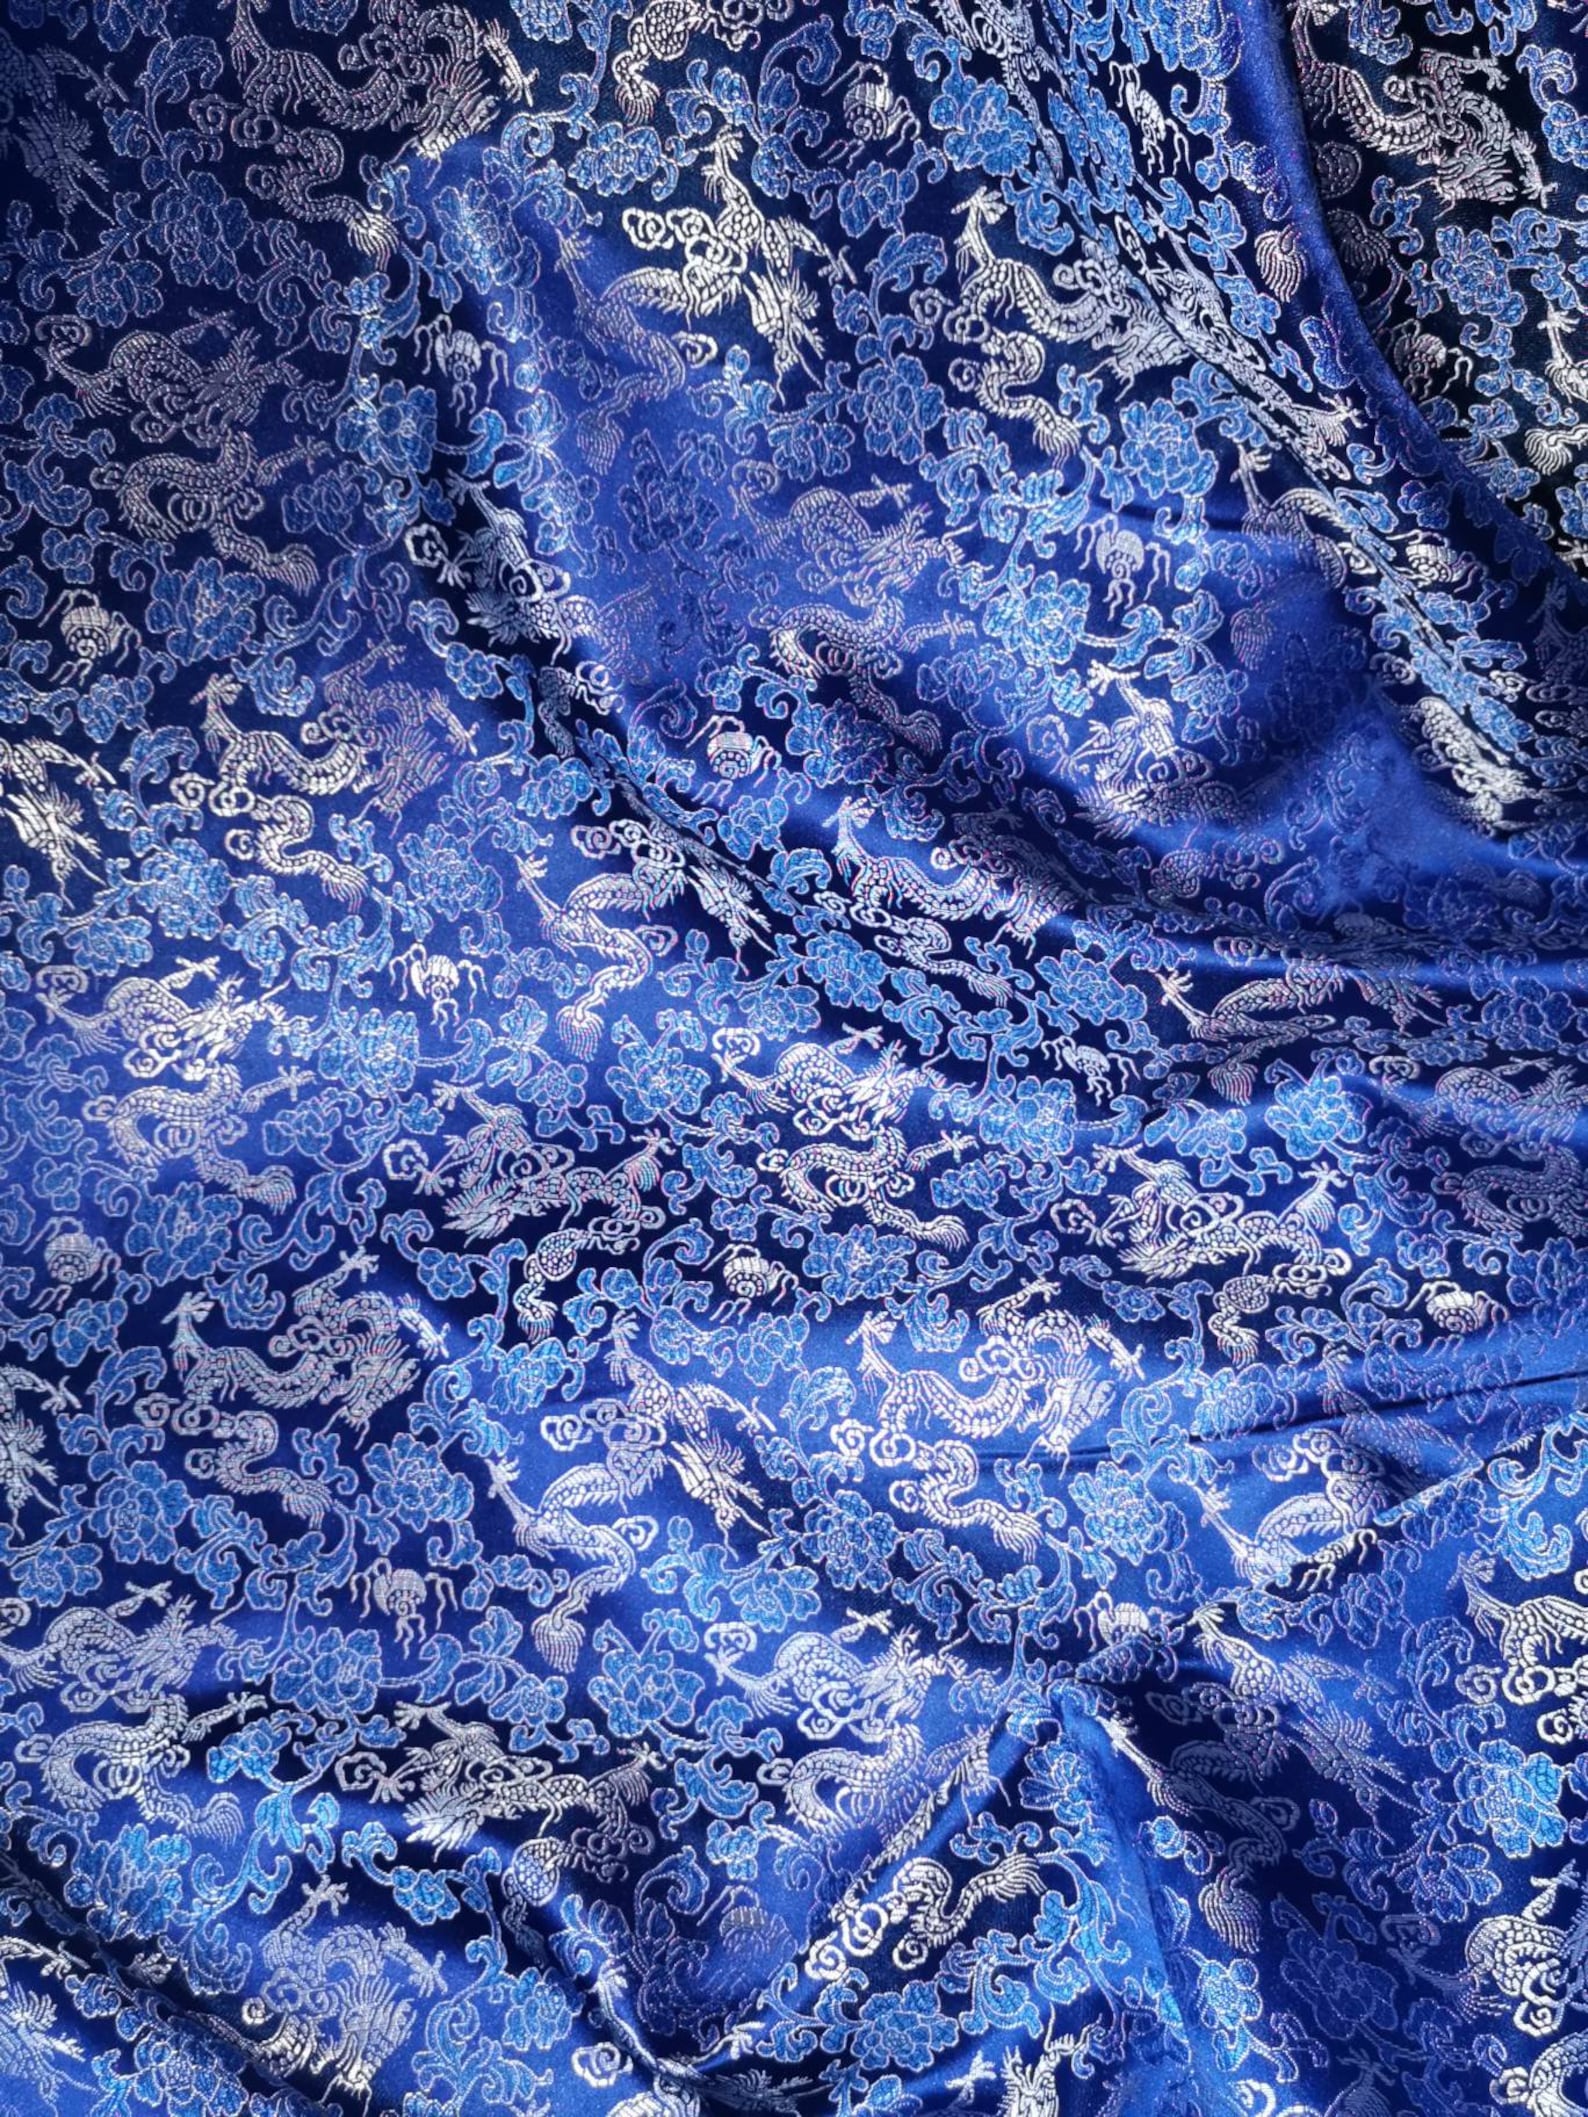 Satin royal blue jacquard brocade fabric with Chinese silver | Etsy